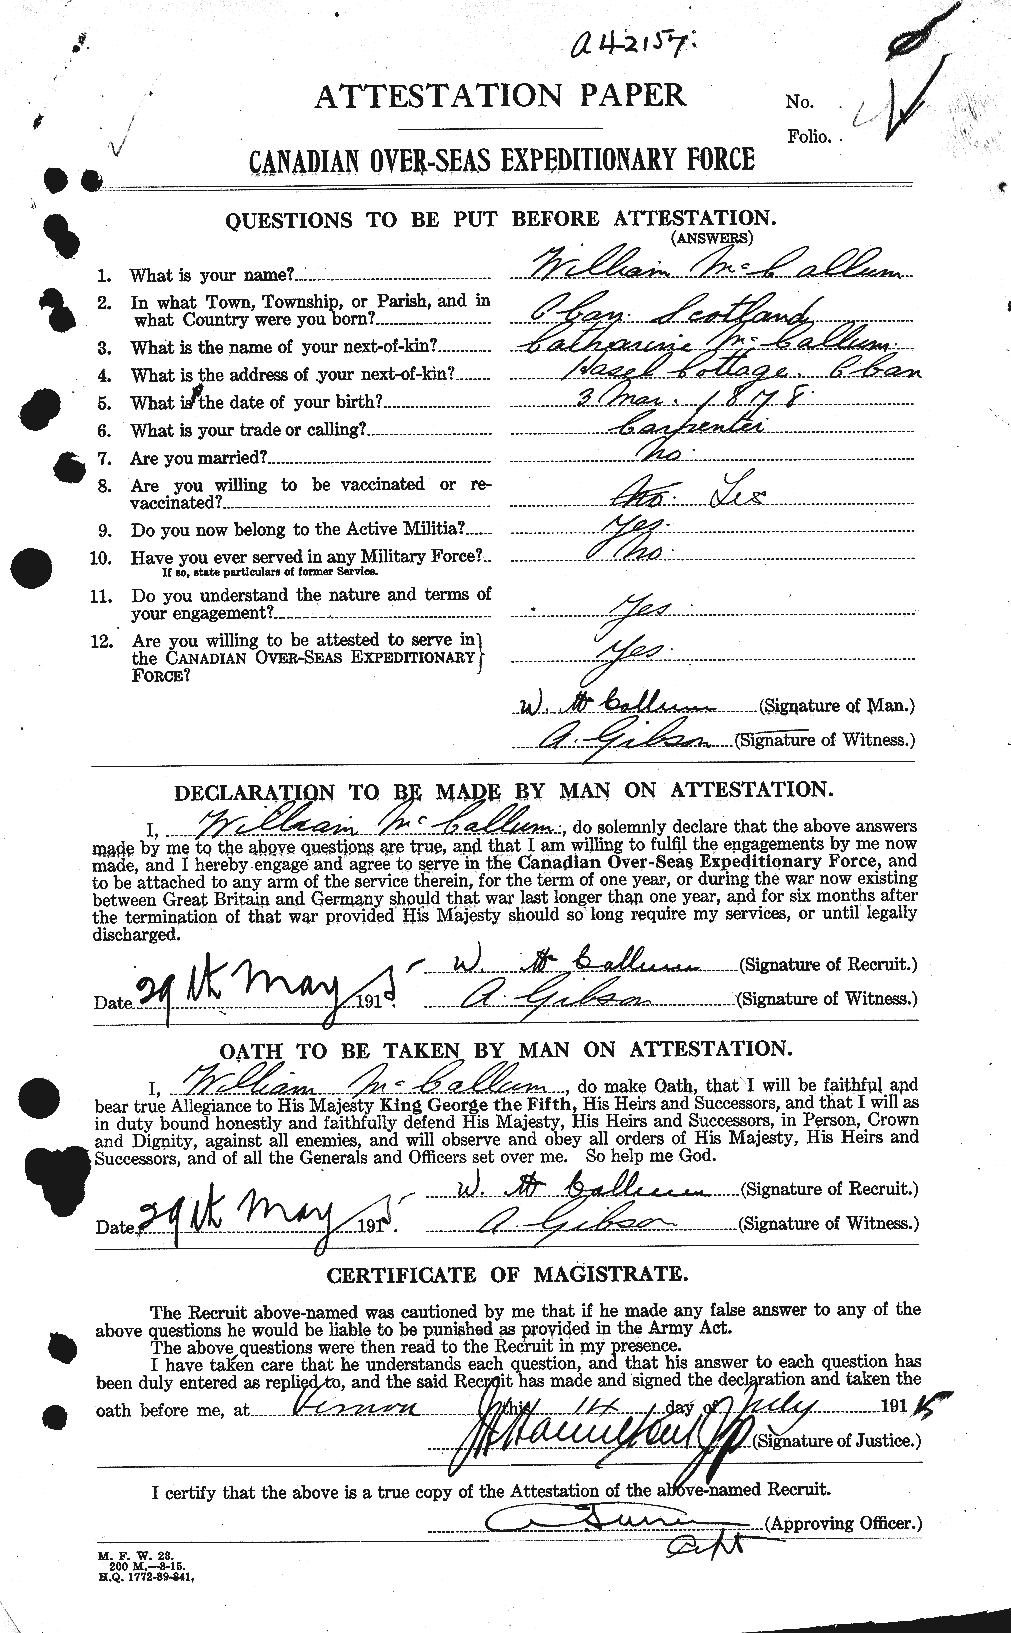 Personnel Records of the First World War - CEF 131428a